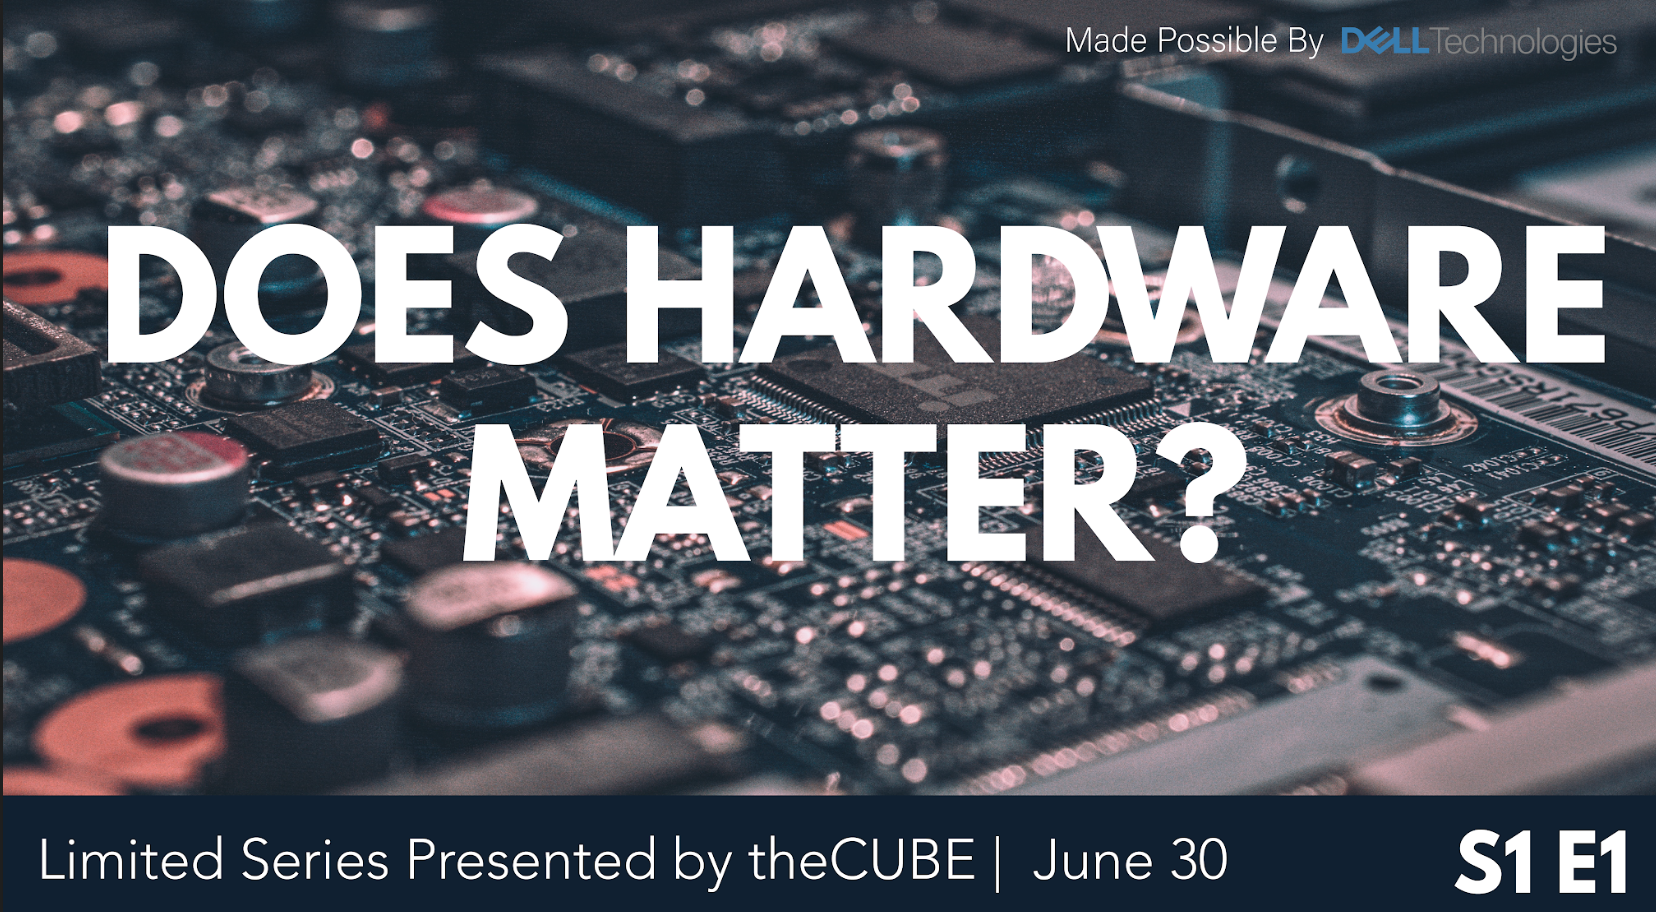 What to expect during the 'Does Hardware Matter?' pilot episode: Join theCUBE June 30